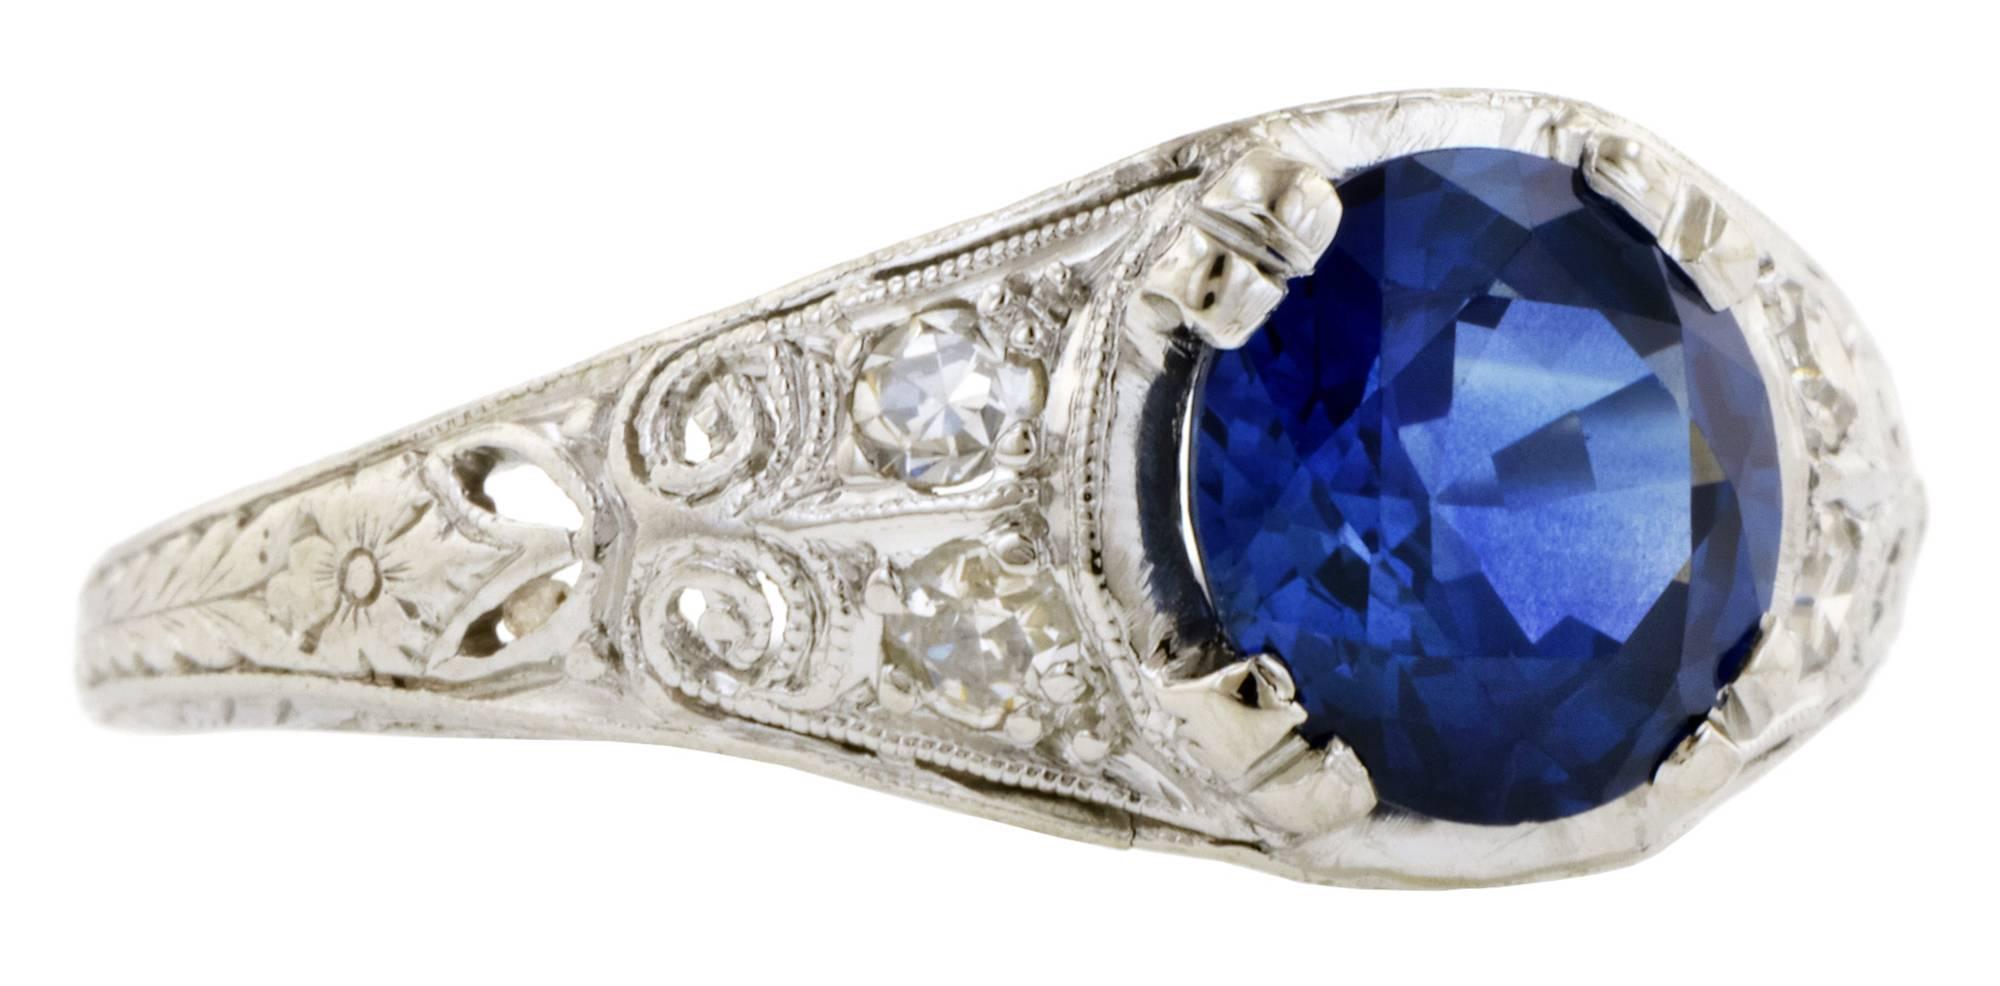 Art Deco sapphire ring centering a round sapphire weighing app. 1.66ct, flanked by four Single cut diamonds weighing app. 0.10ctw., in a tapered, filigree design with engraved flower & wheat detail on shoulders, fashioned in platinum. Circa 1935.